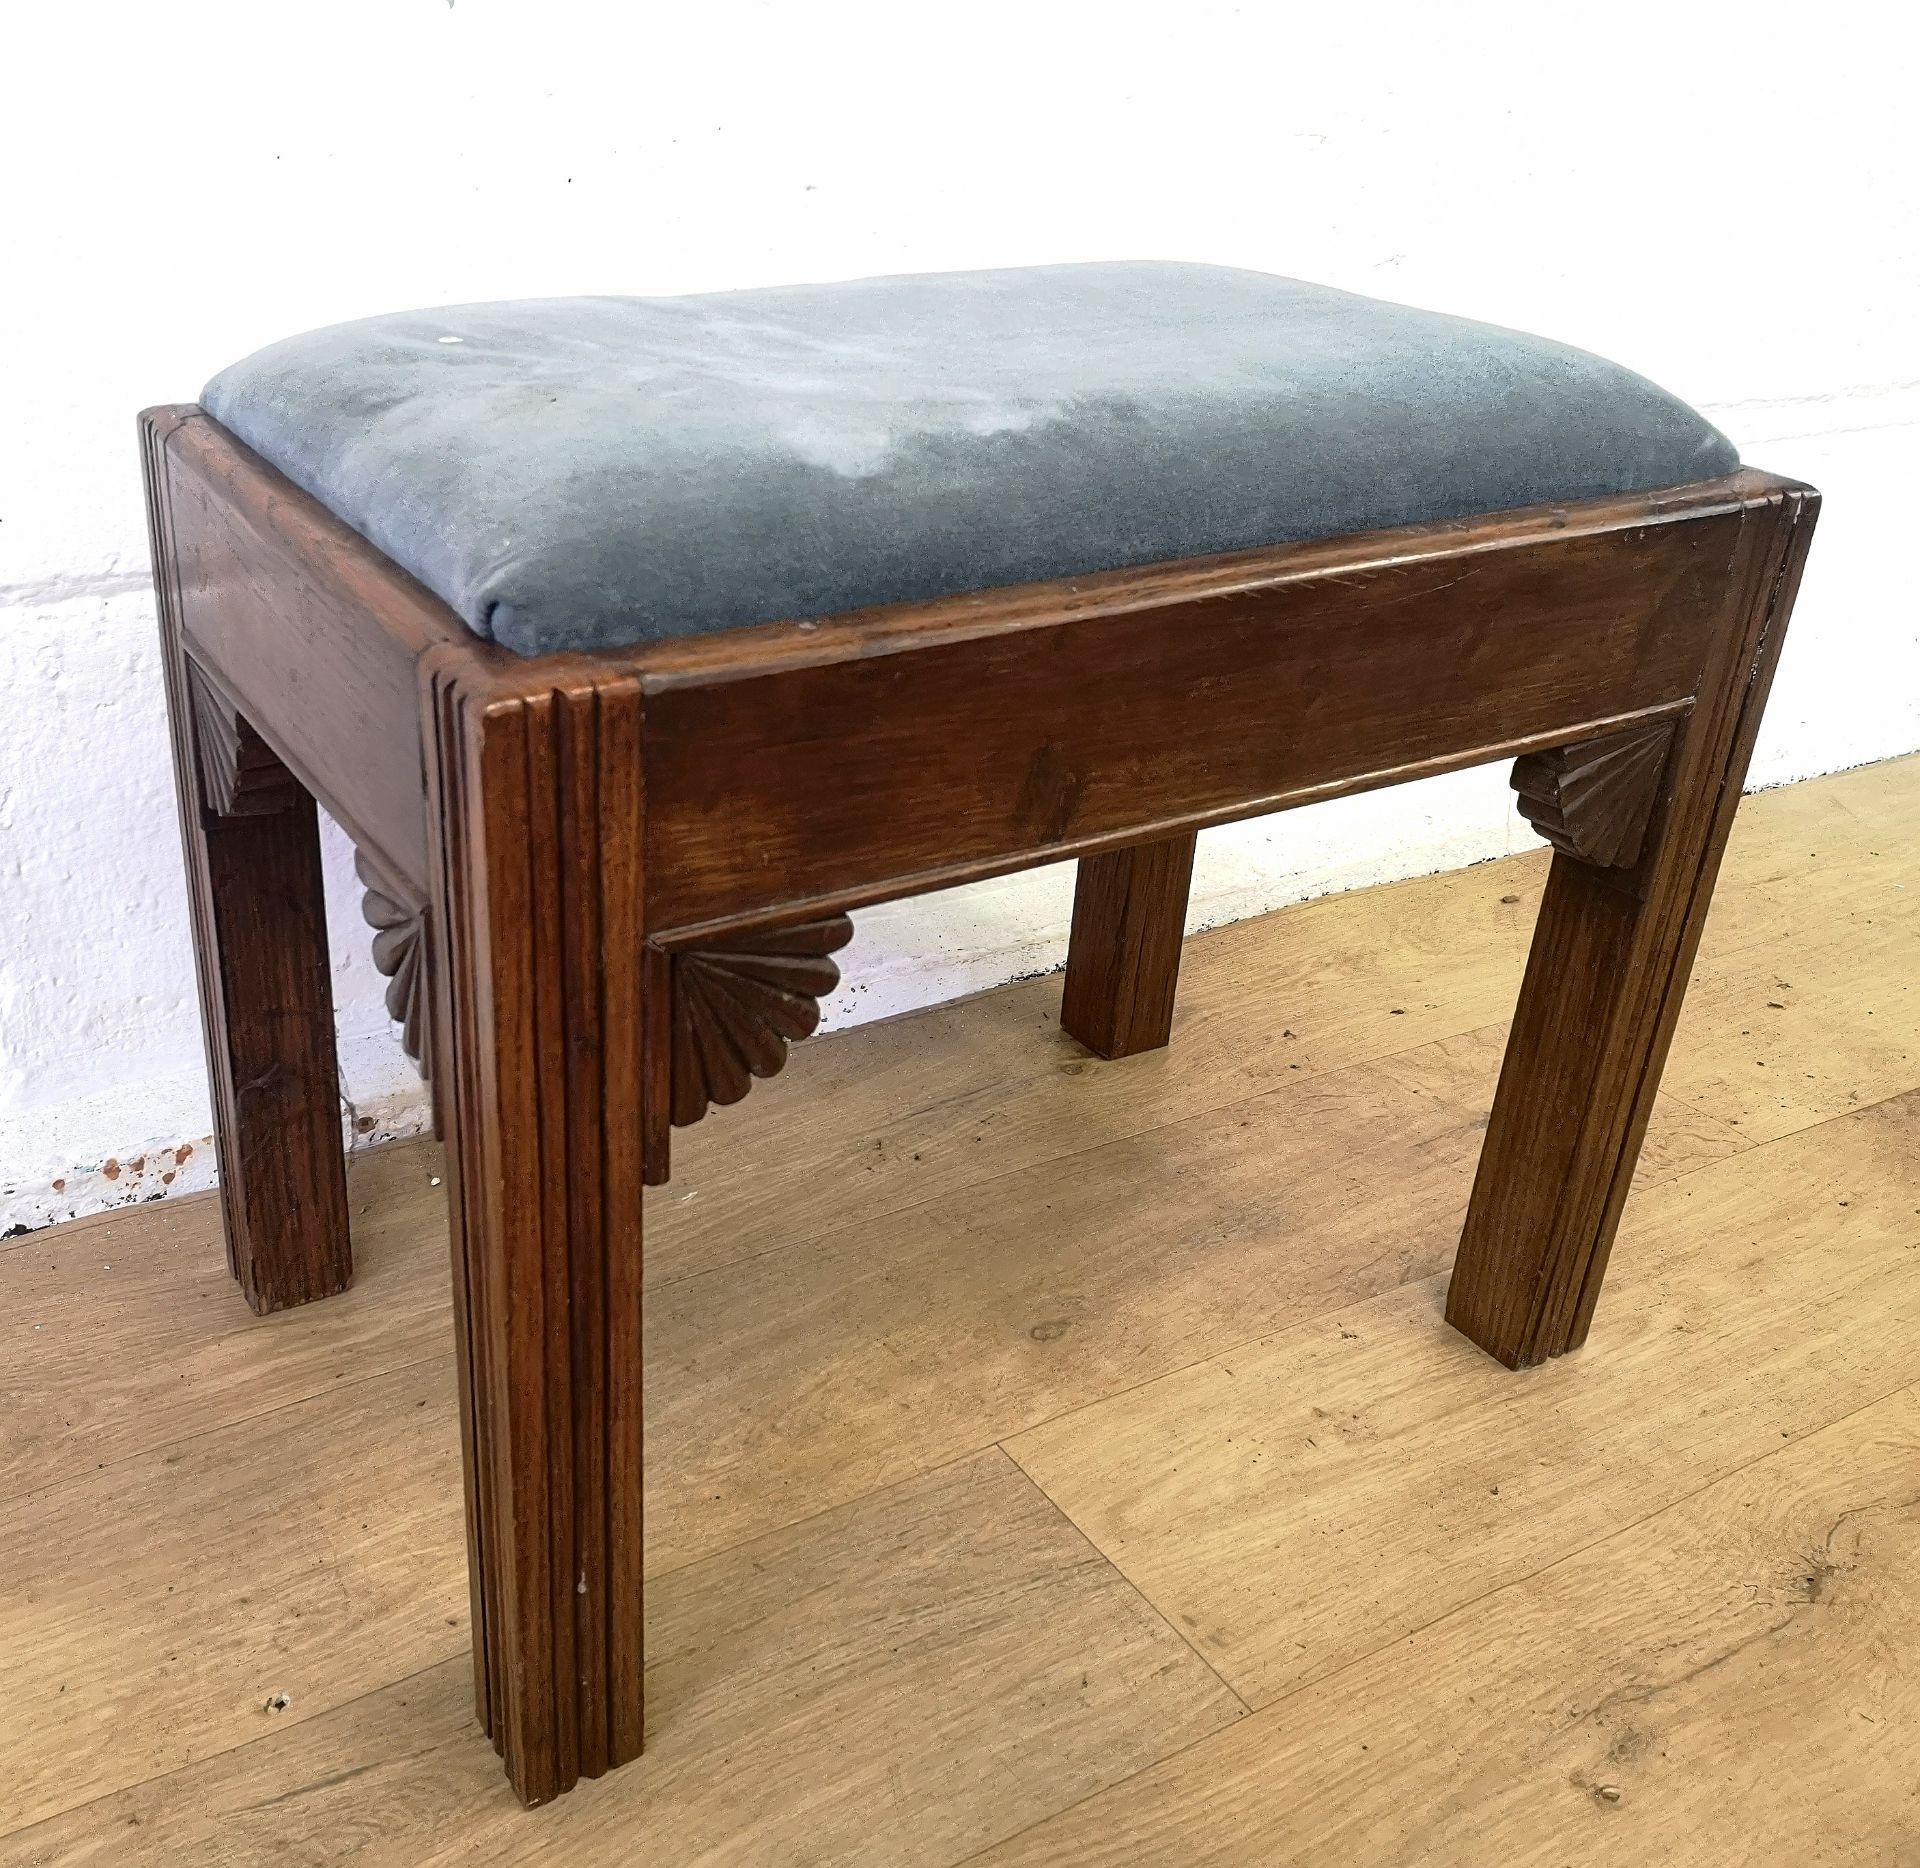 Mahogany stool with drop in seat